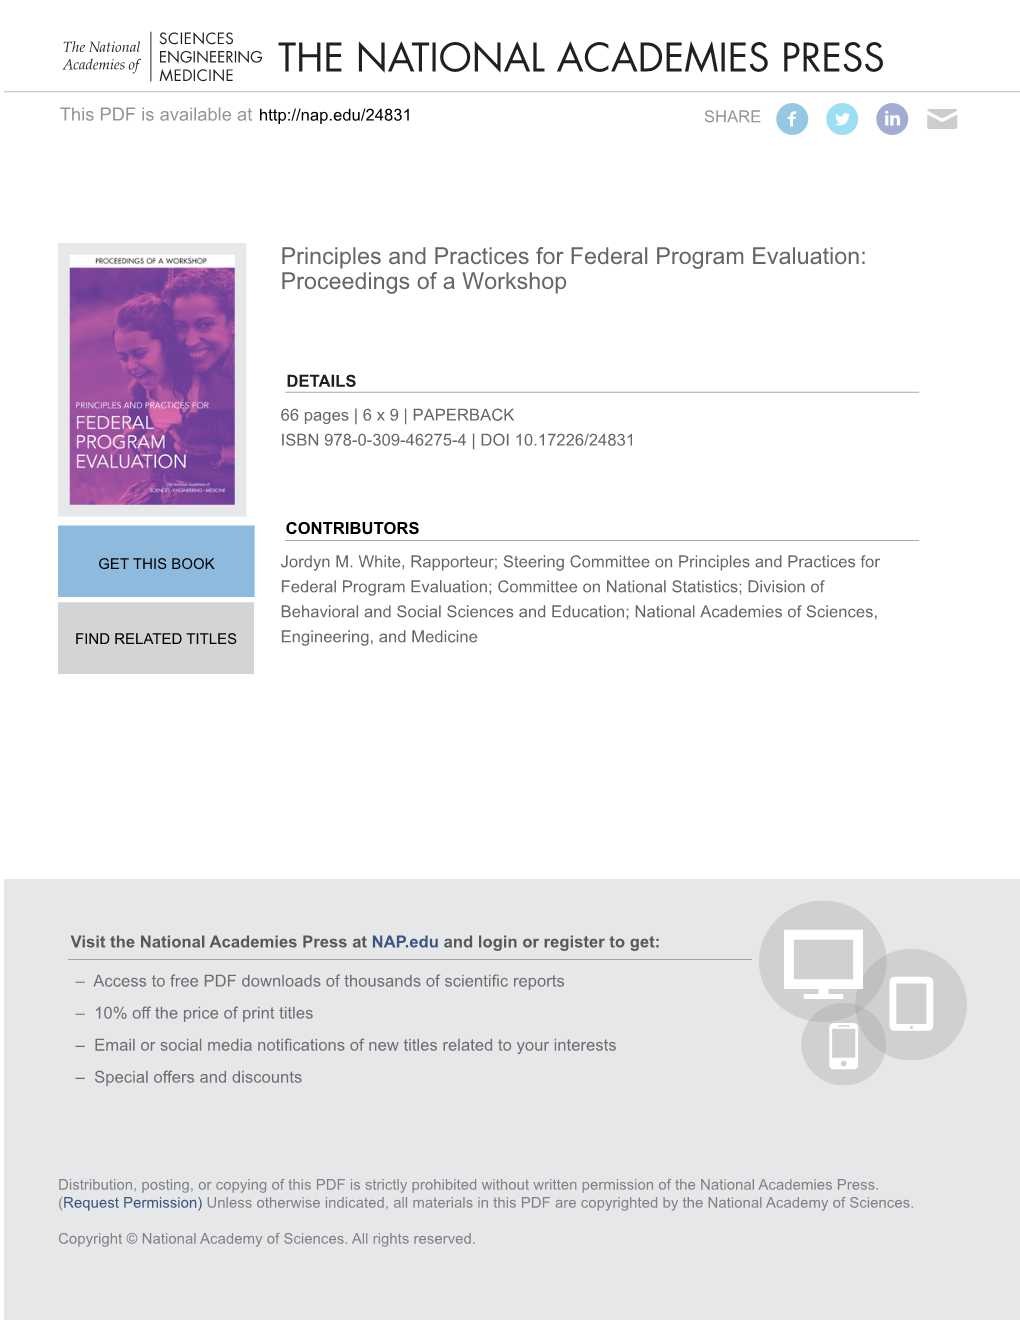 Principles and Practices for Federal Program Evaluation: Proceedings of a Workshop